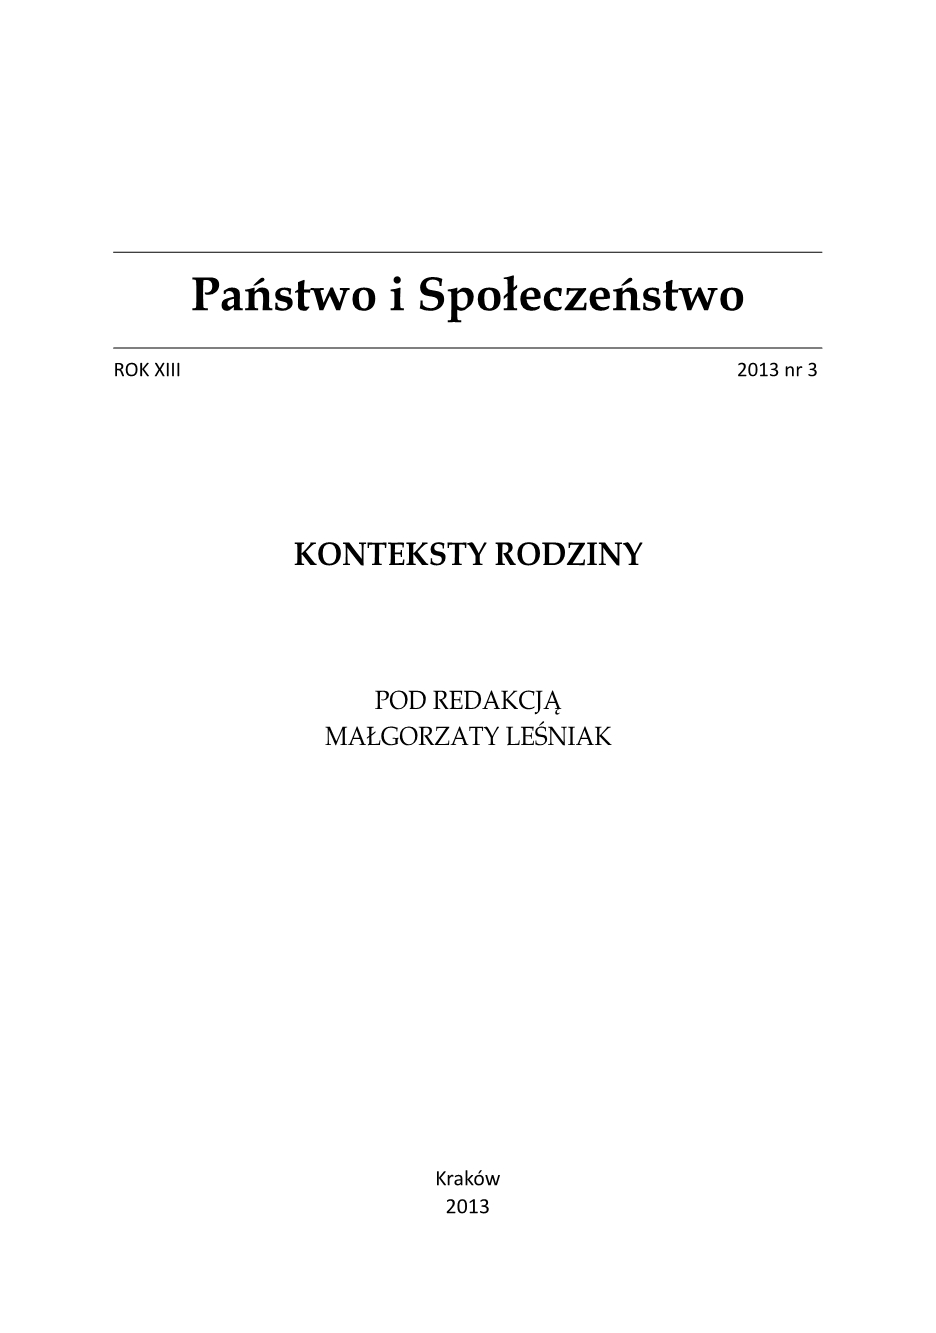 Image of Women in Polish Art of the Last 20 Years Cover Image